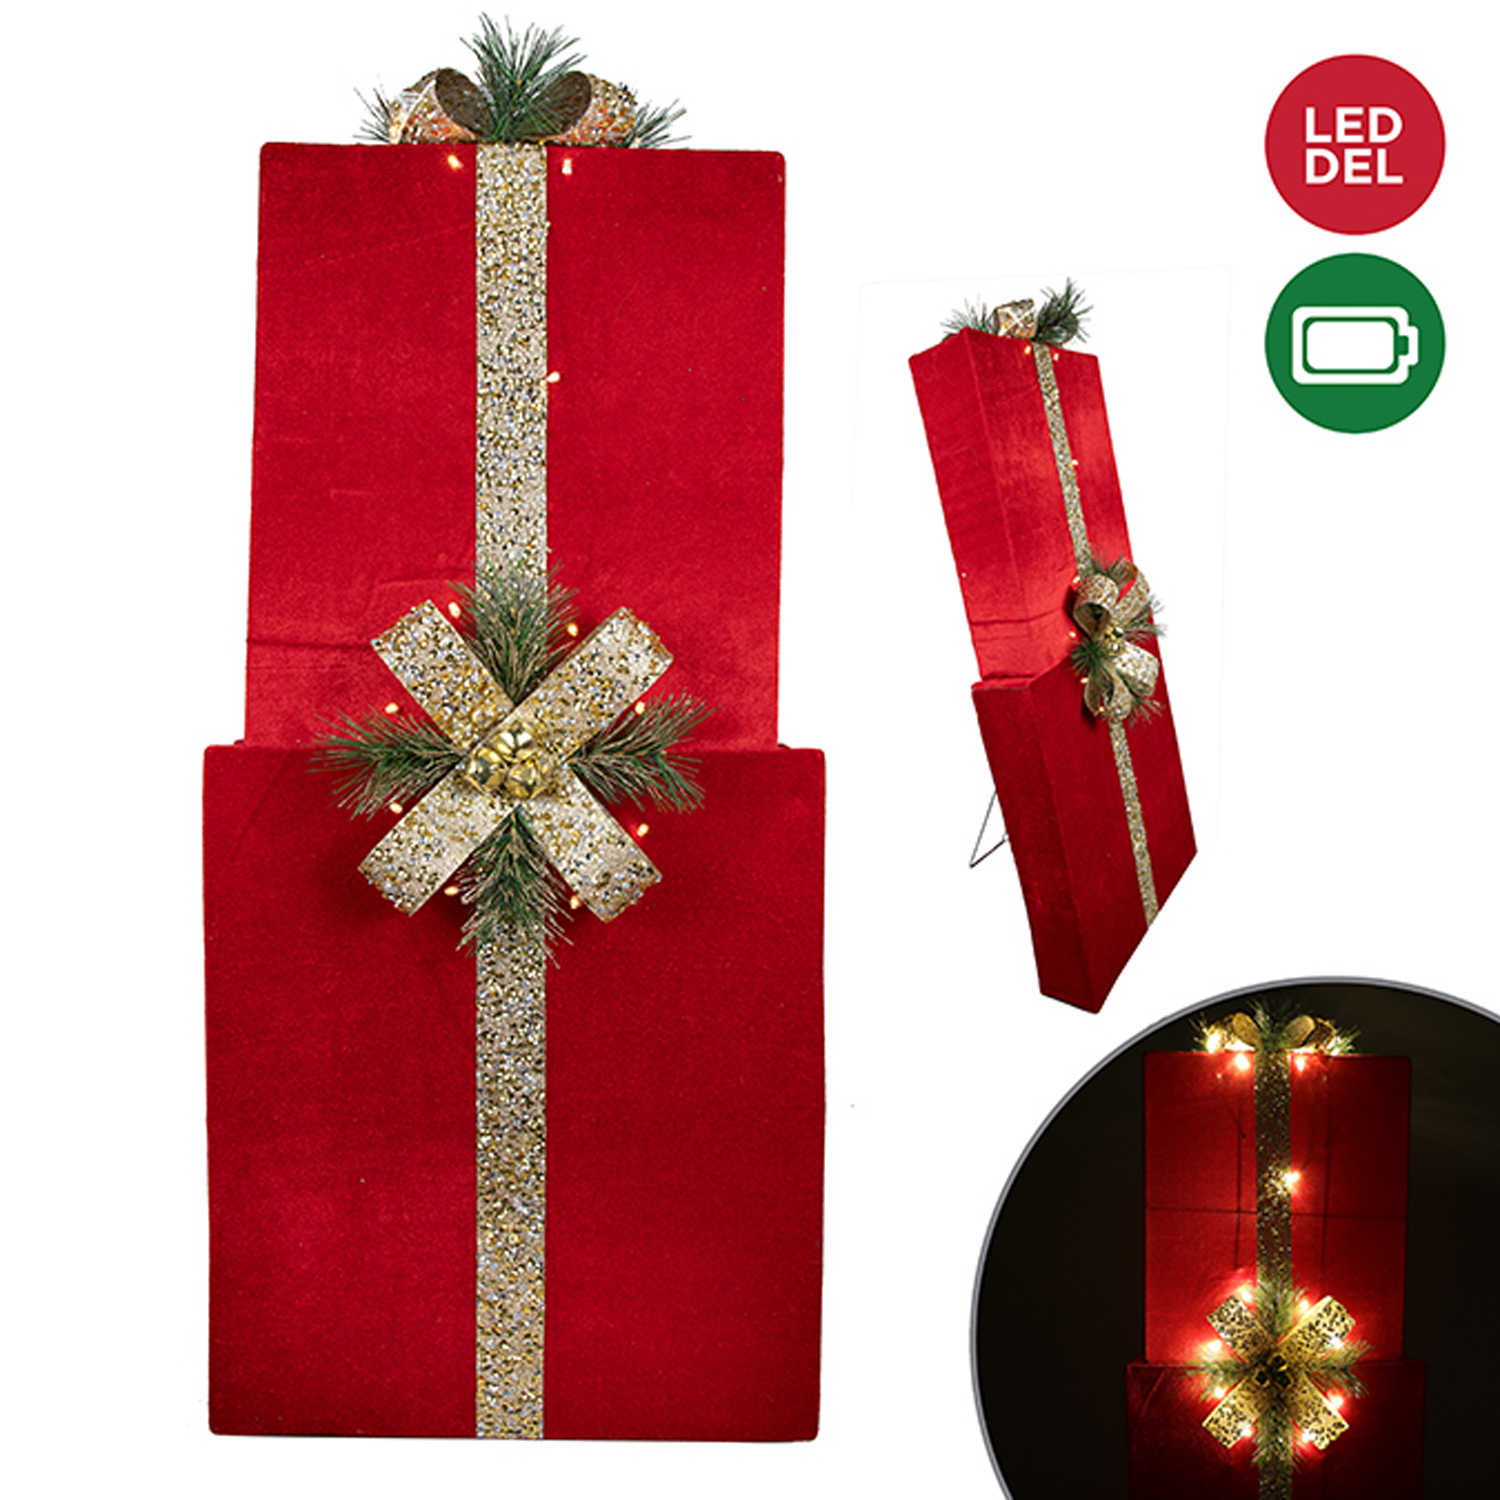 Danson - Set of 2 gift boxes with LED lights